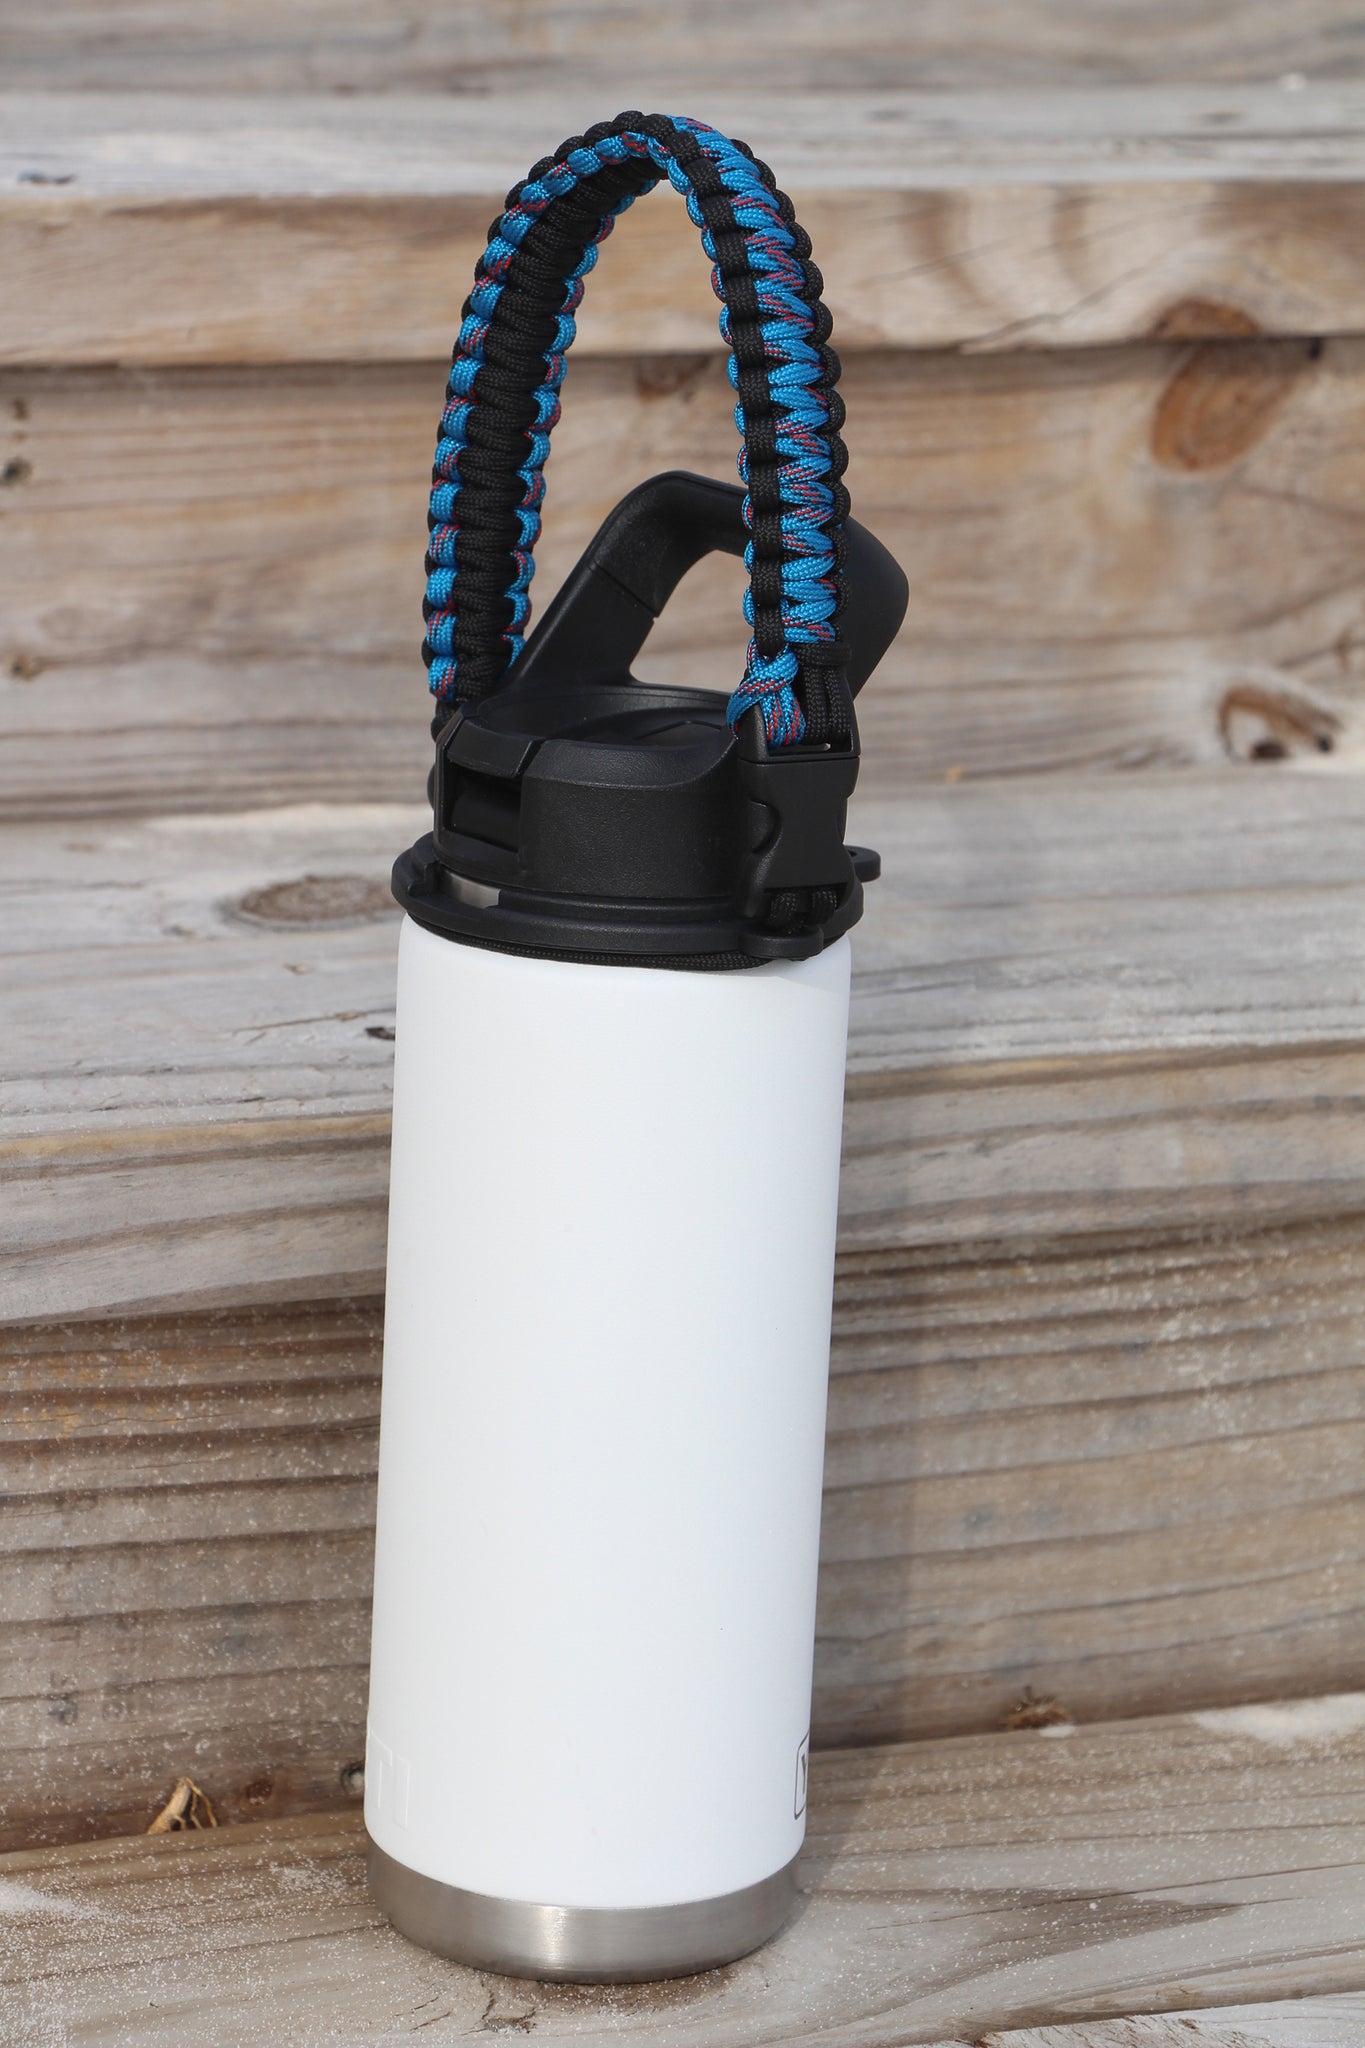 Best Yeti Paracord Cup Handles for sale in Mount Dora, Florida for